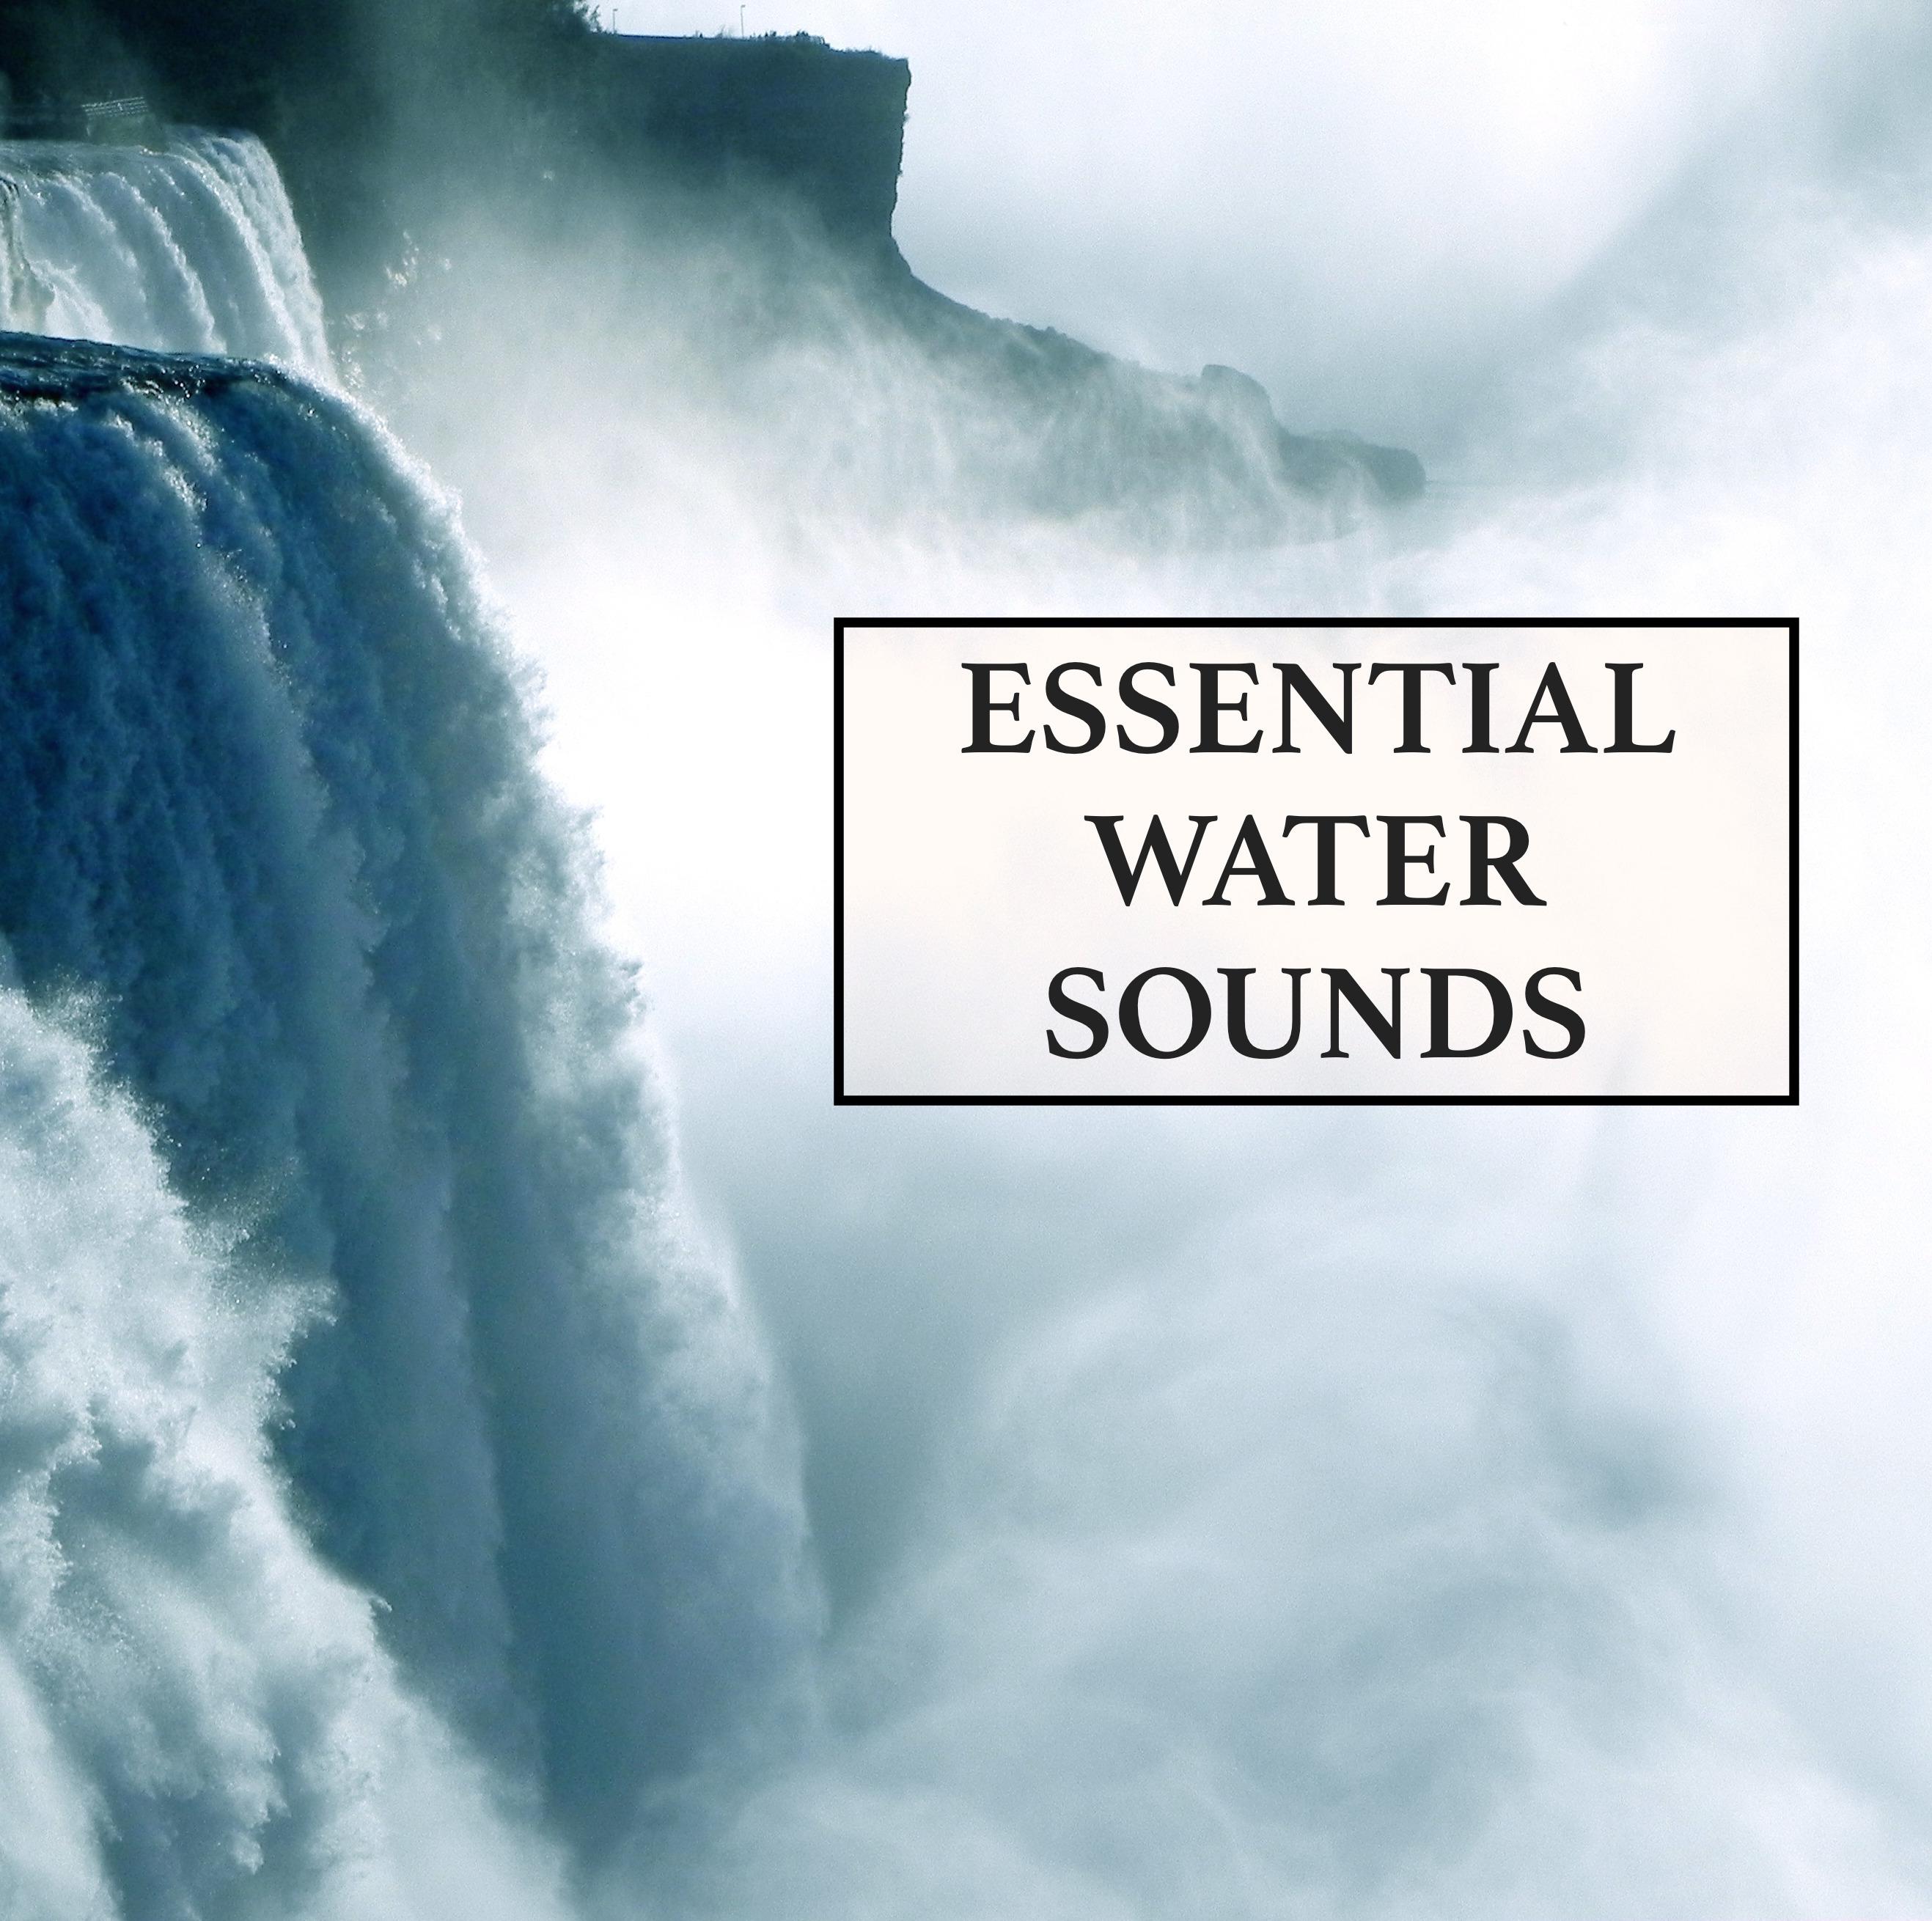 Essential Water Sounds Mix - The Ultimate Collection of Rain and Water Sounds to Relax, Revive, De-Stress, Encourage Mindfulness and Meditation, and Promote Healthy Natural Living and Study Success